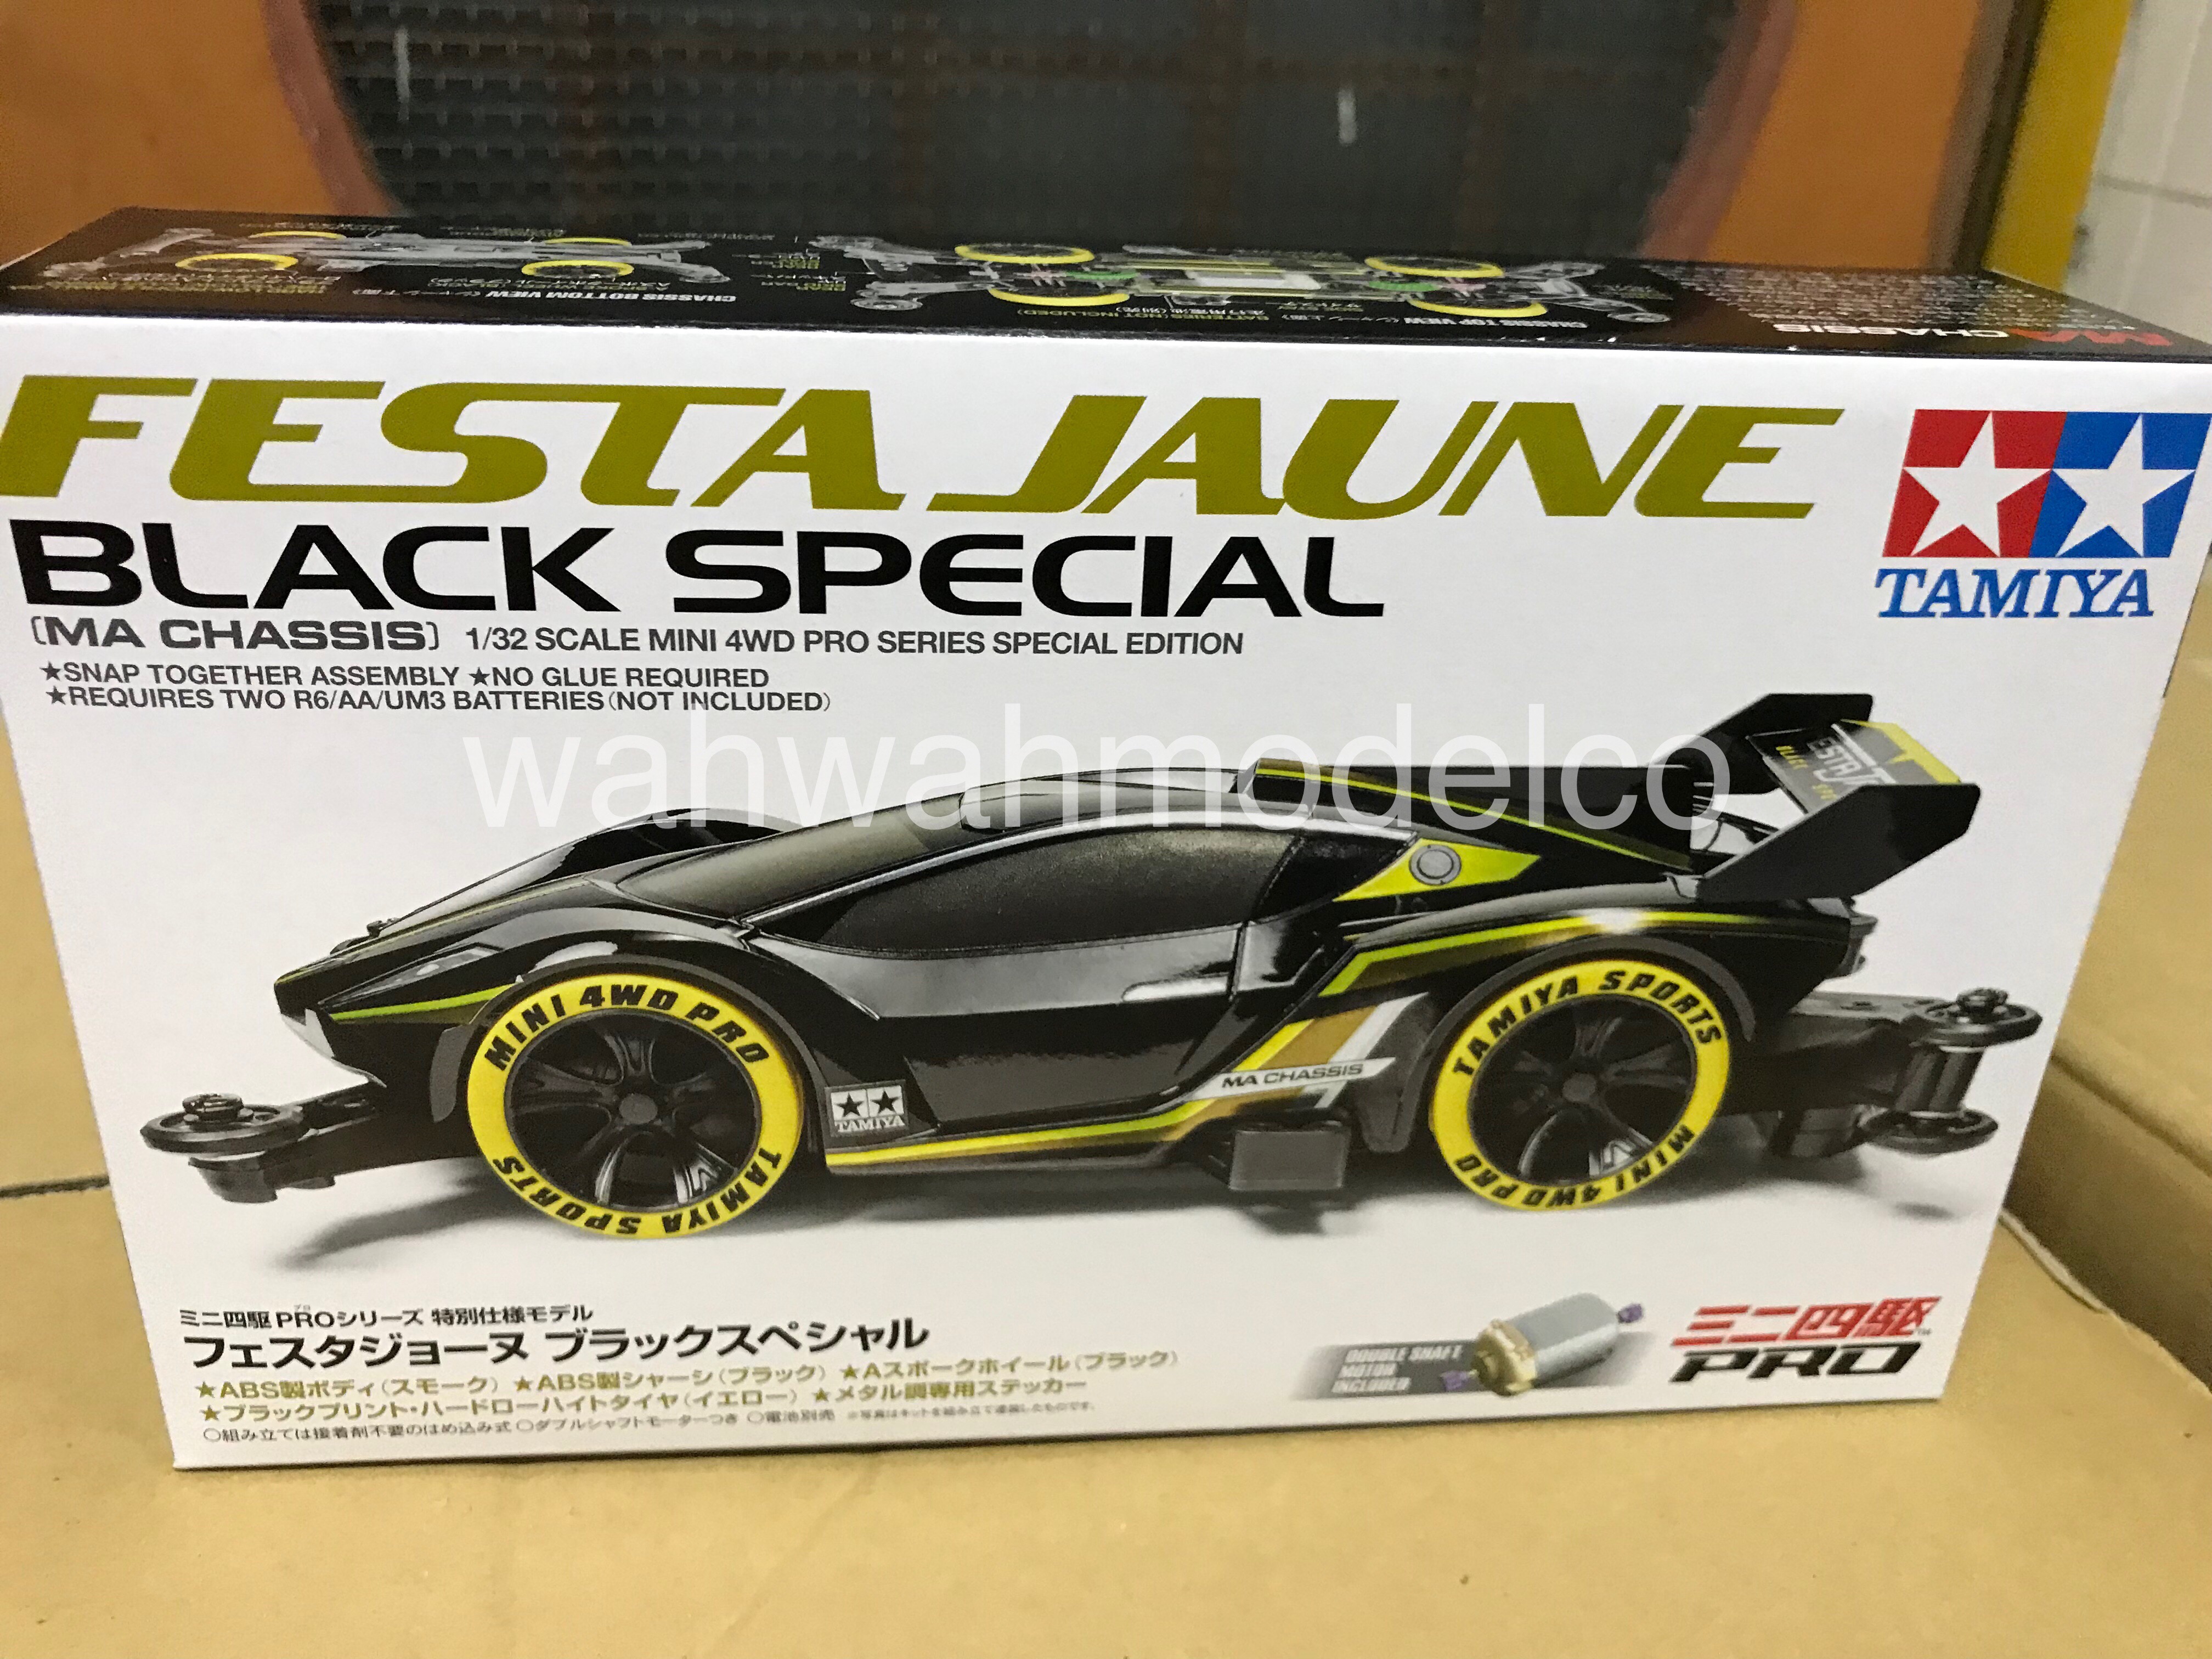 Tamiya Mini 4WD Special Project Product Festa Joona Black Special MA Chassis